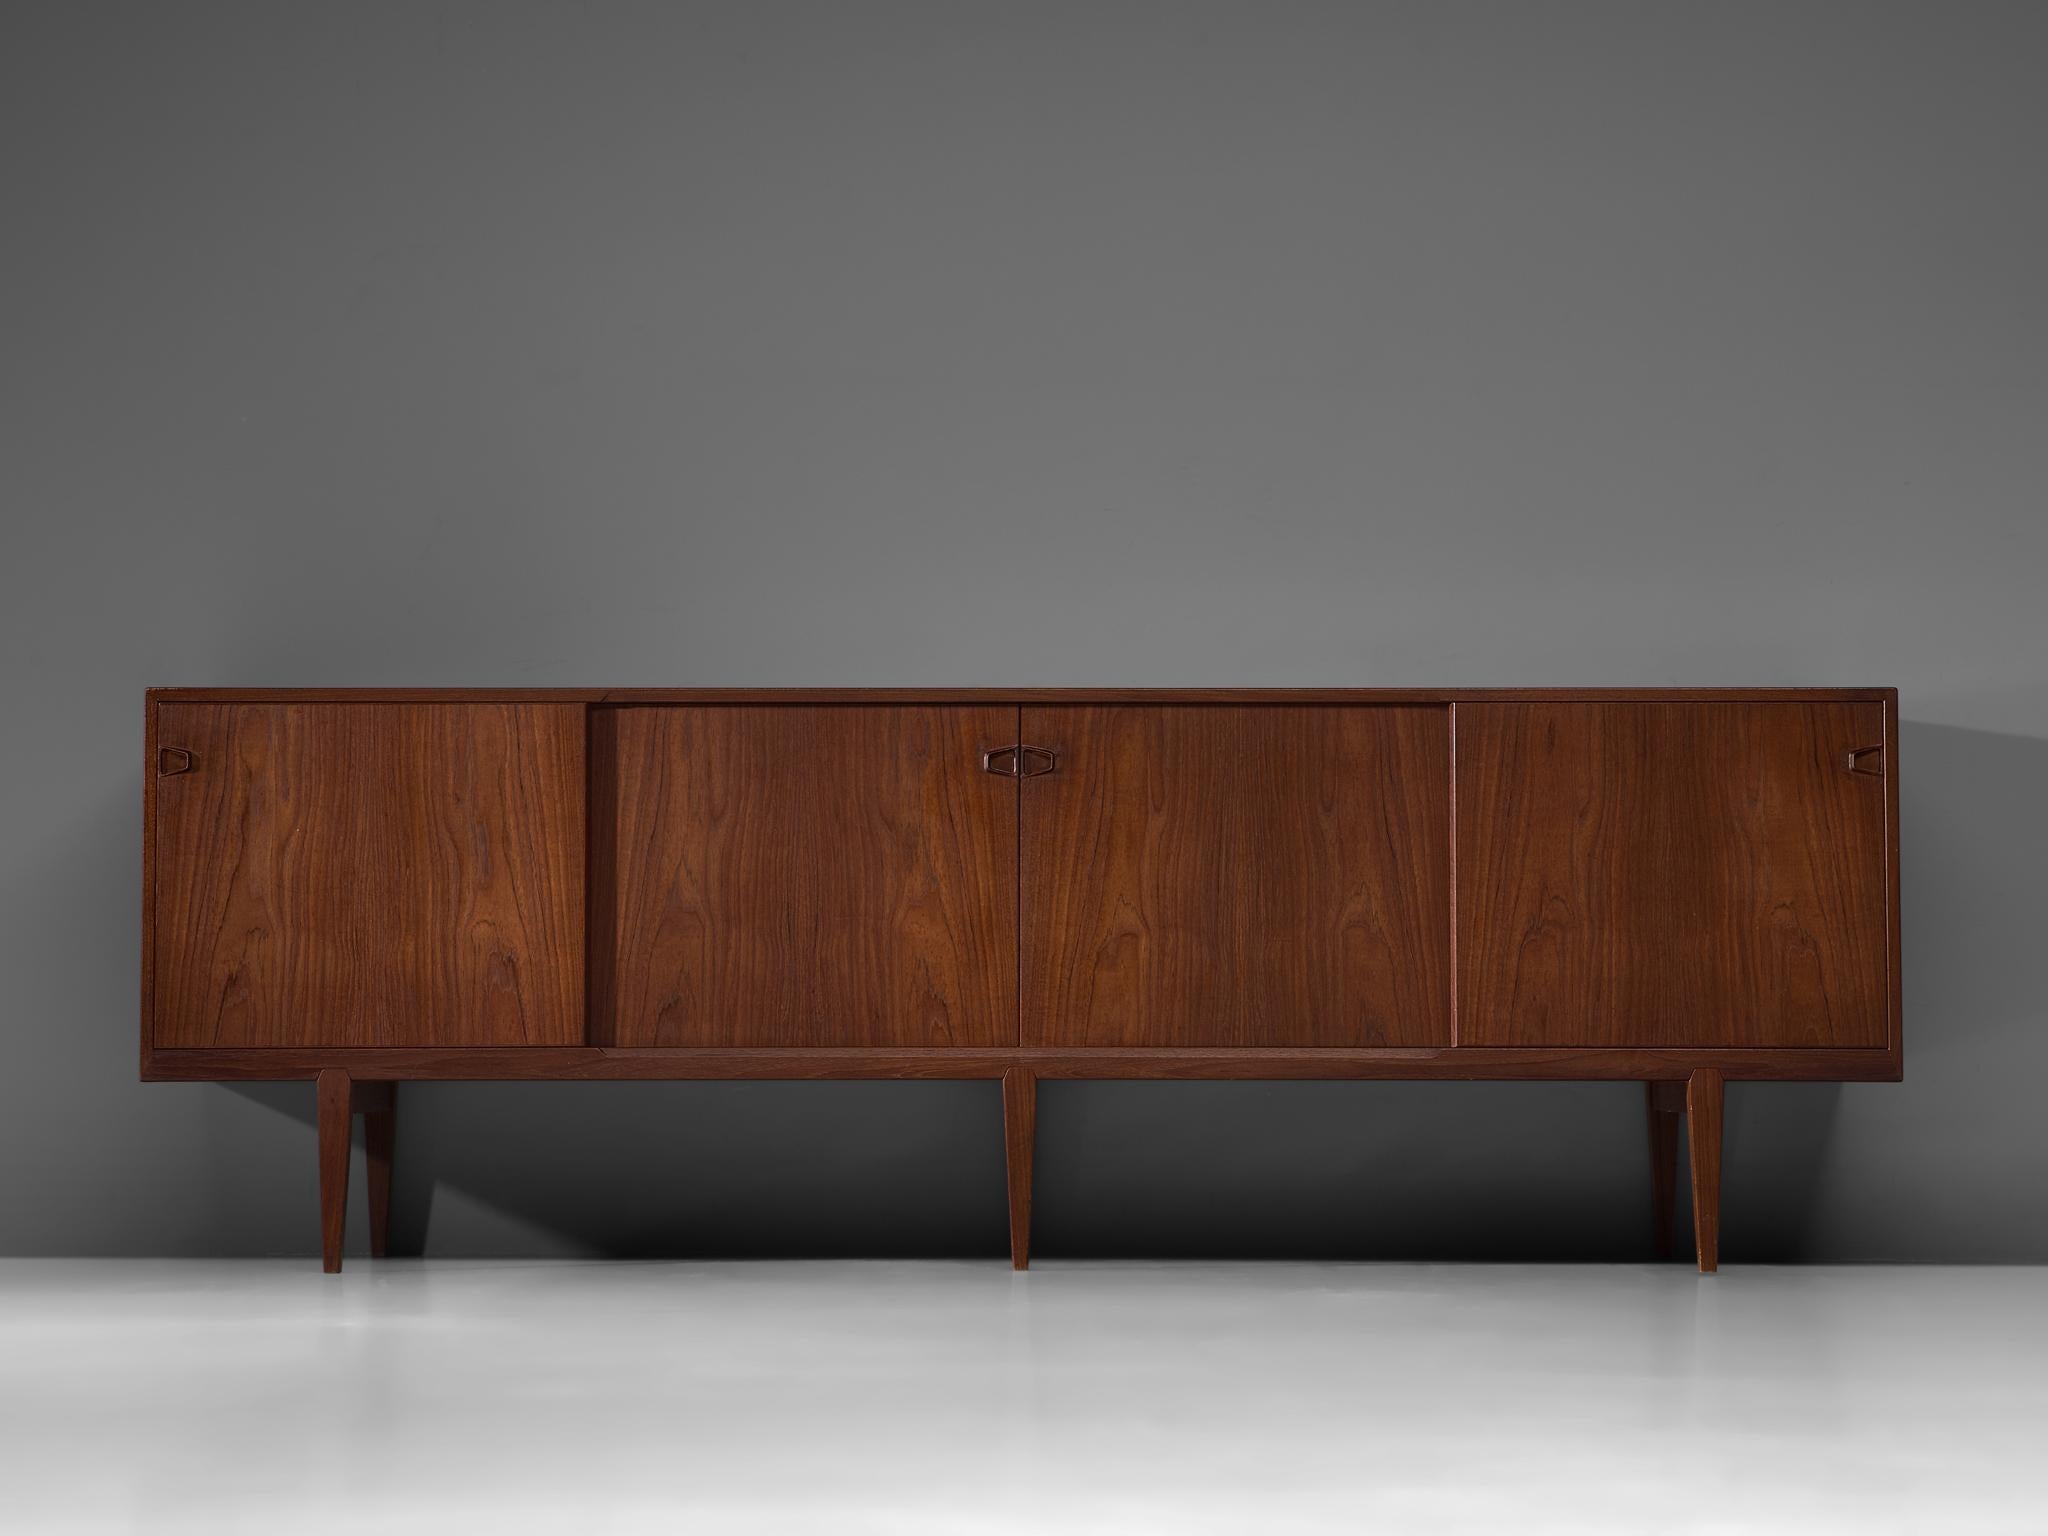 Rosengren Hansen for Brande, sideboard, teak, Denmark, 1960s.

Well-designed long sideboard by Rosengren Hansen, which features a simplistic design with sharp lines. This modern sideboard has four compartments which you can access through sliding